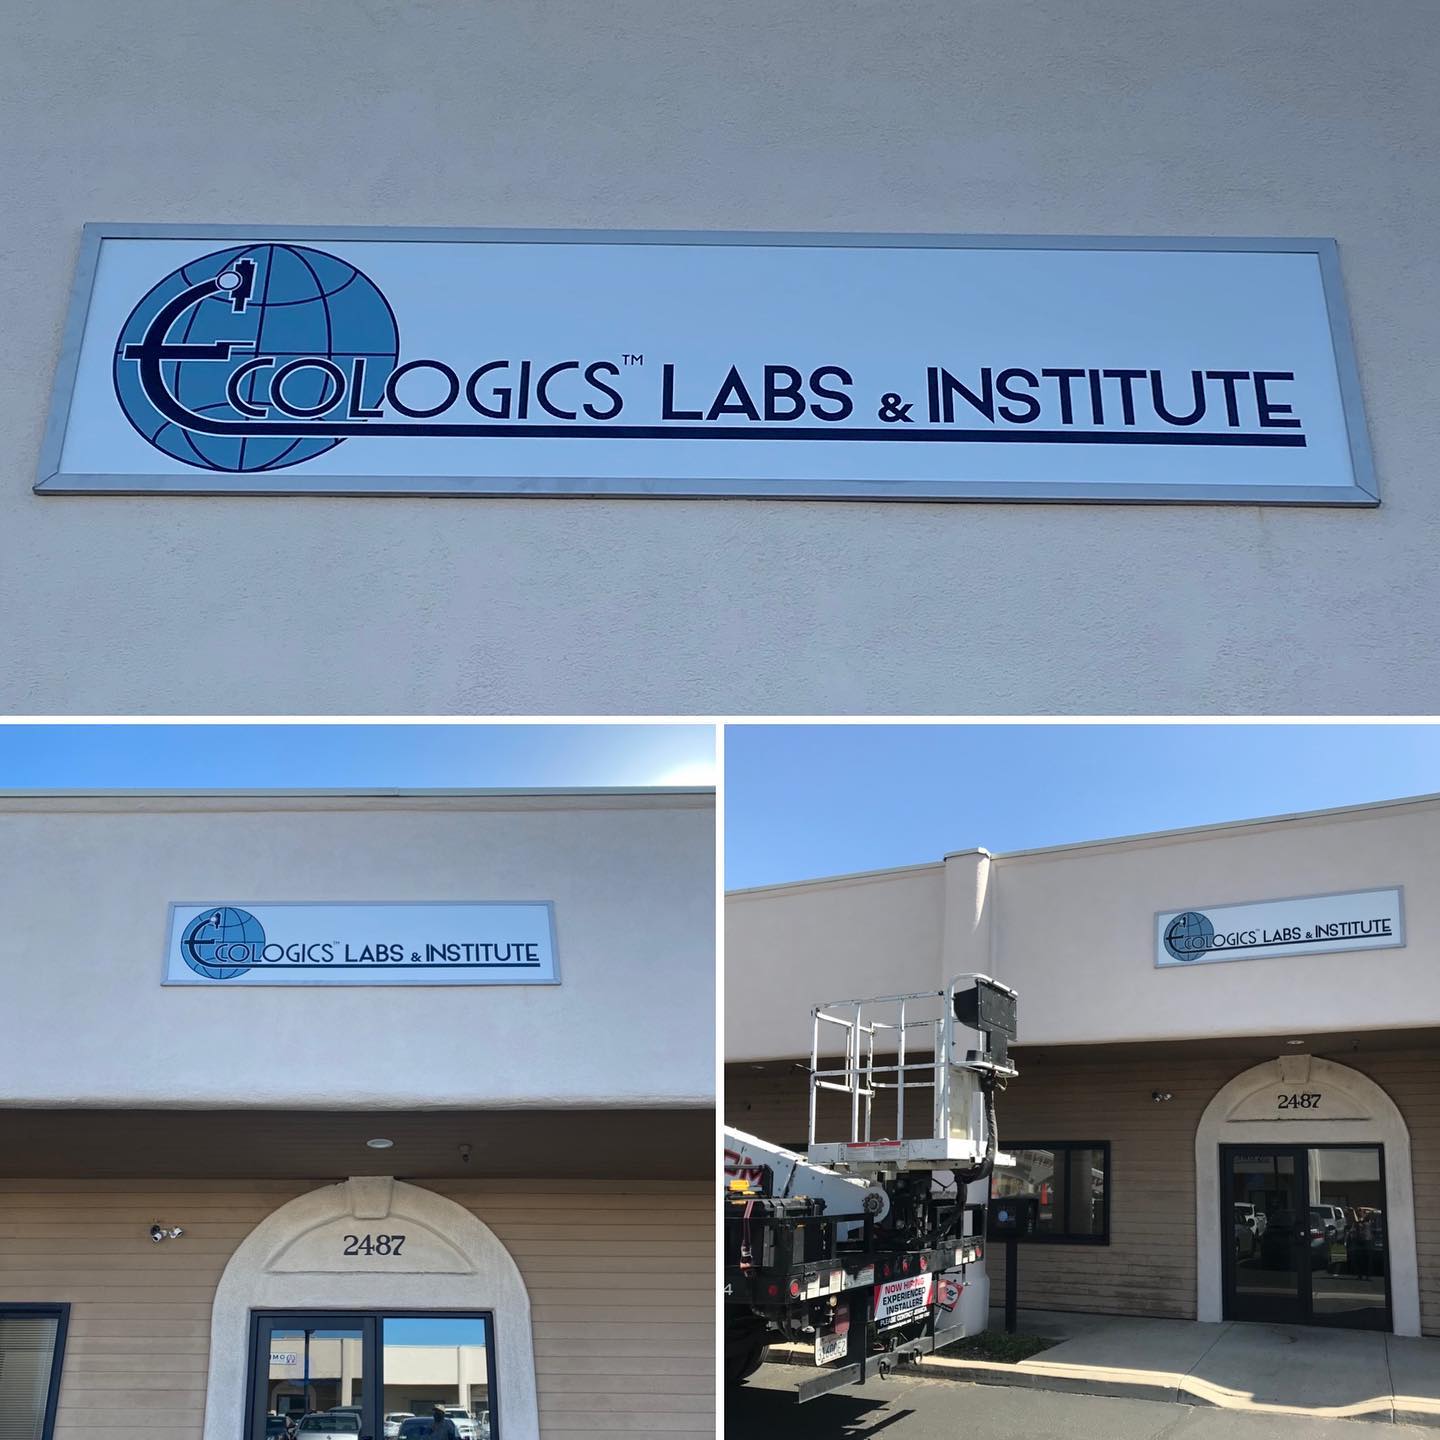 We are now visible!!!Checkout our new high-quality sign from @sunsetsignsoc 
#ecologicslabs #environmentalscience #environmentallab #asbestos #mold #bacteria #debris #sunsetsignsoc